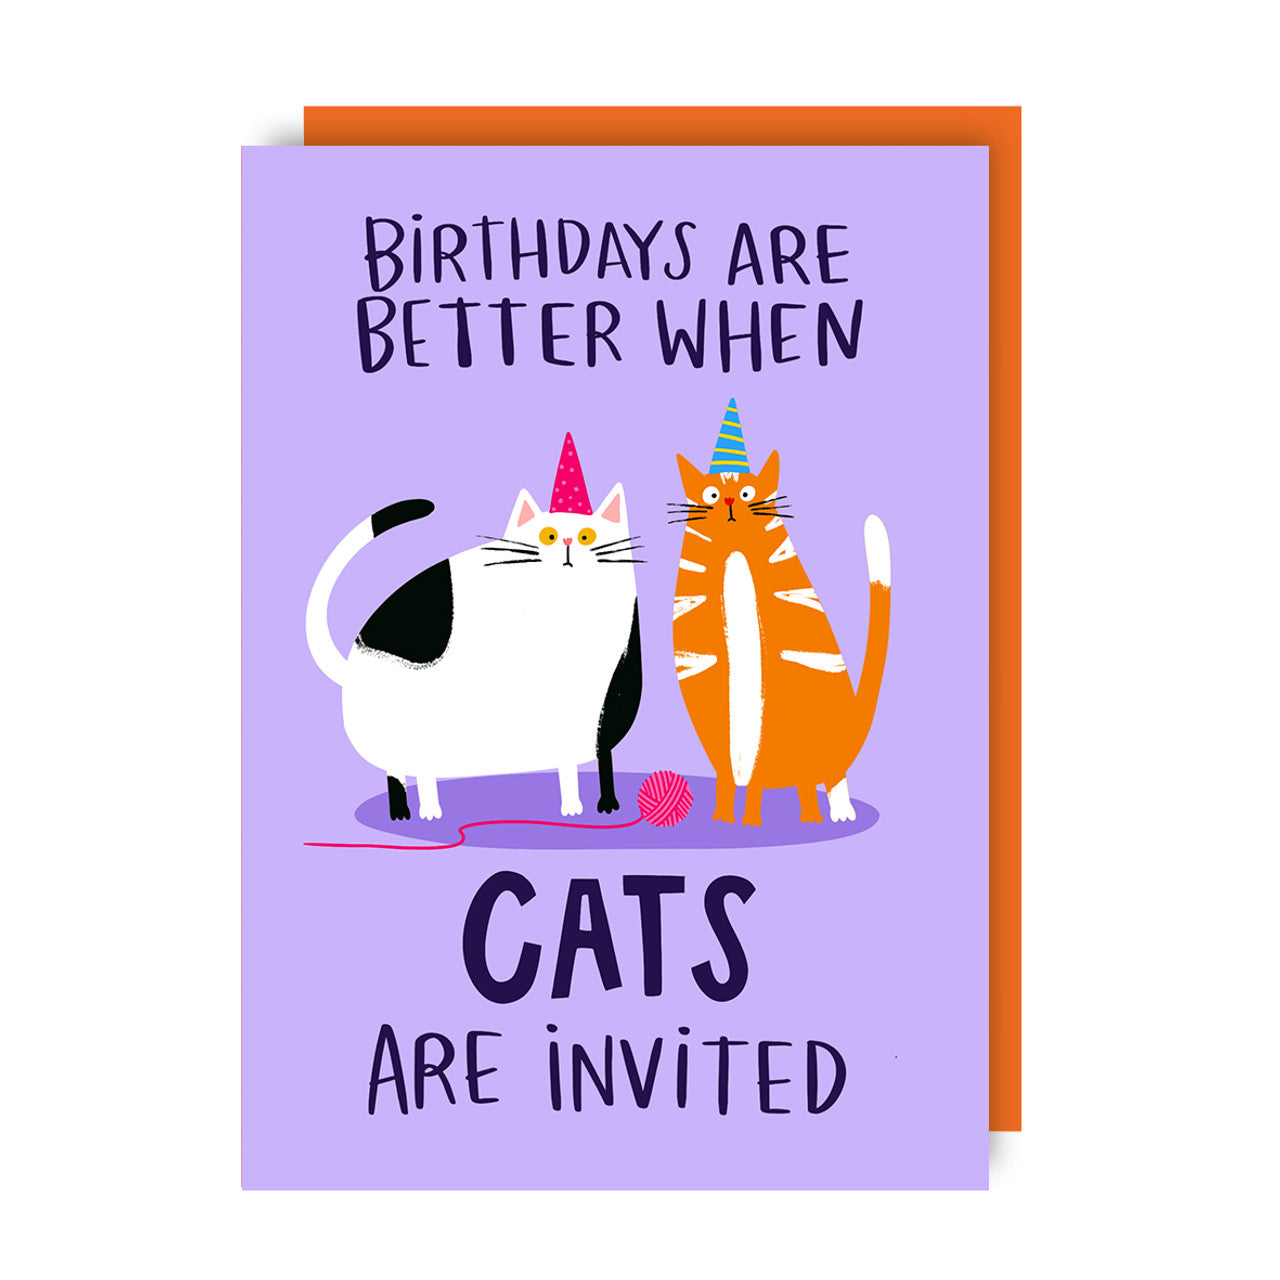 Birthday Card text reads "Birthdays are better when cats are invited"